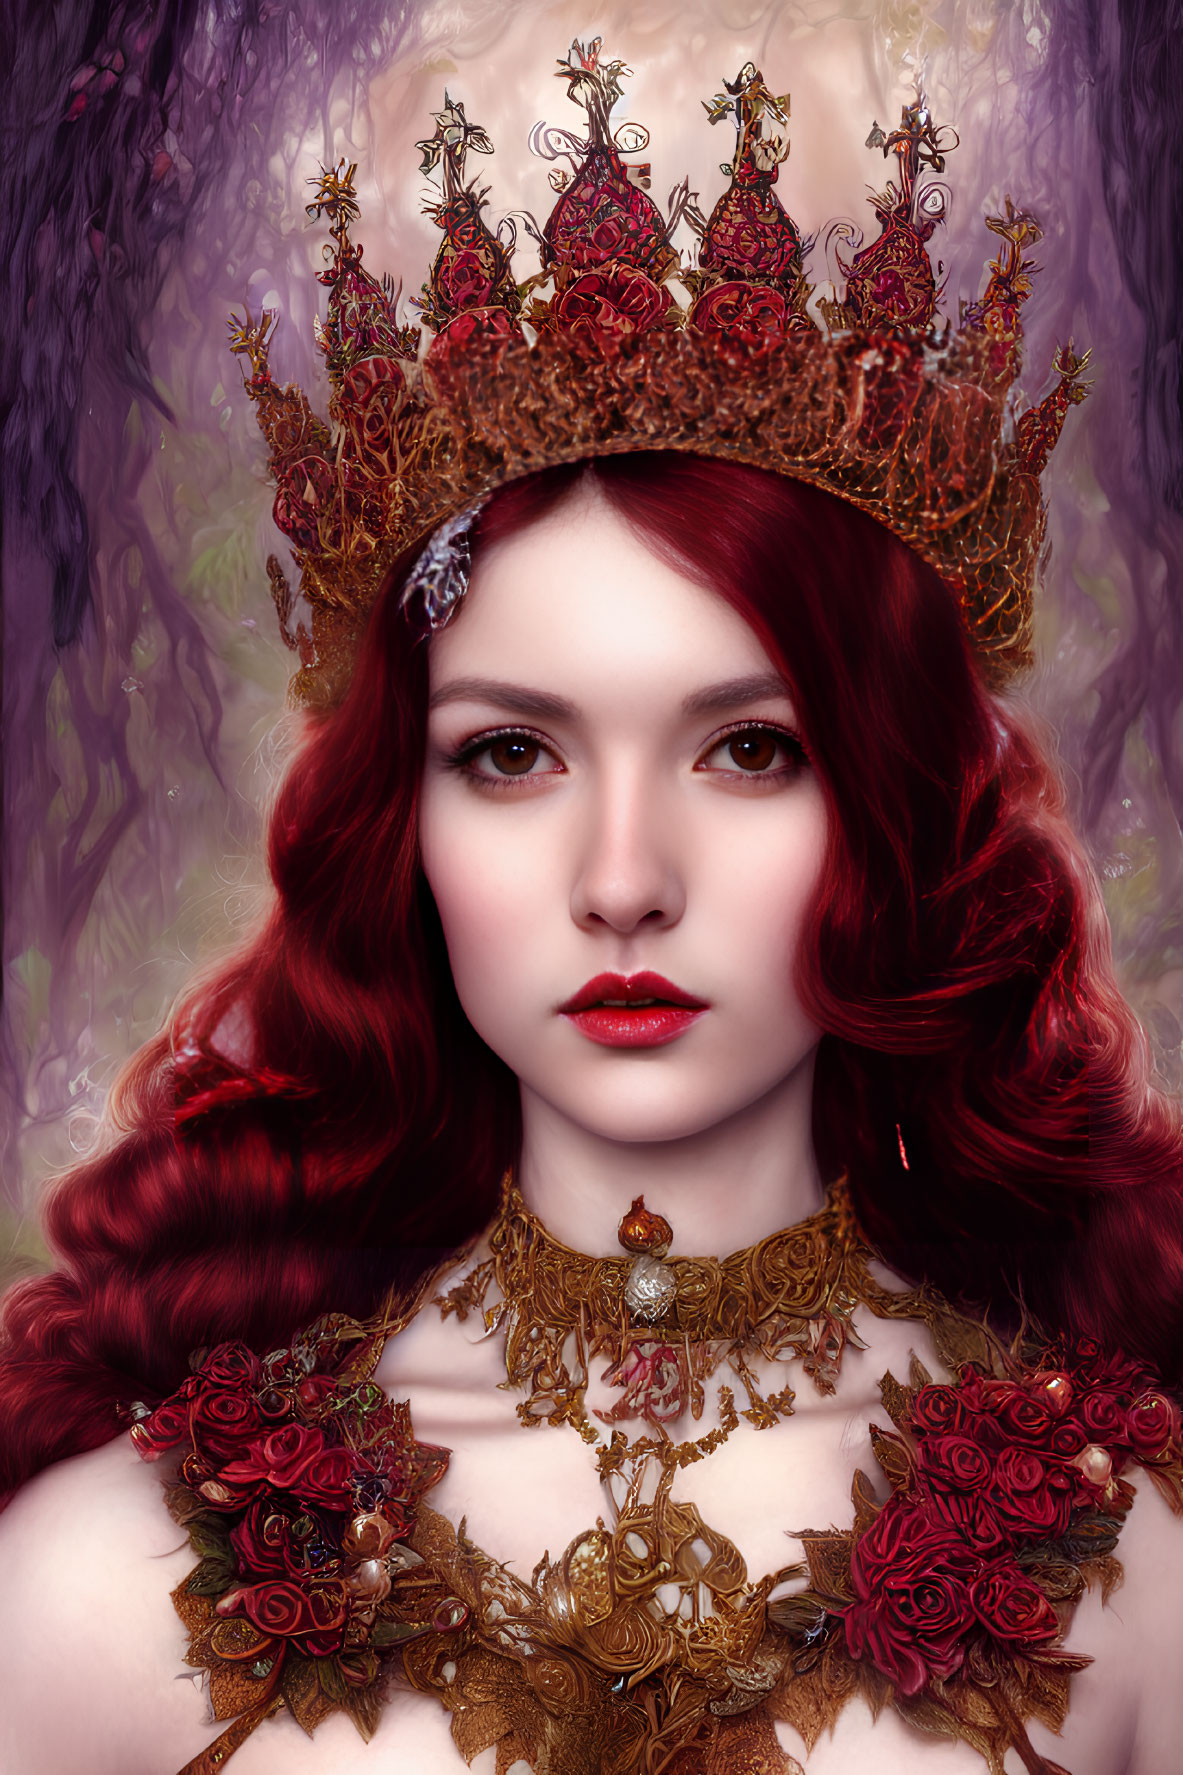 Digital portrait of woman with red hair, crown, rose necklace, and mystical forest backdrop